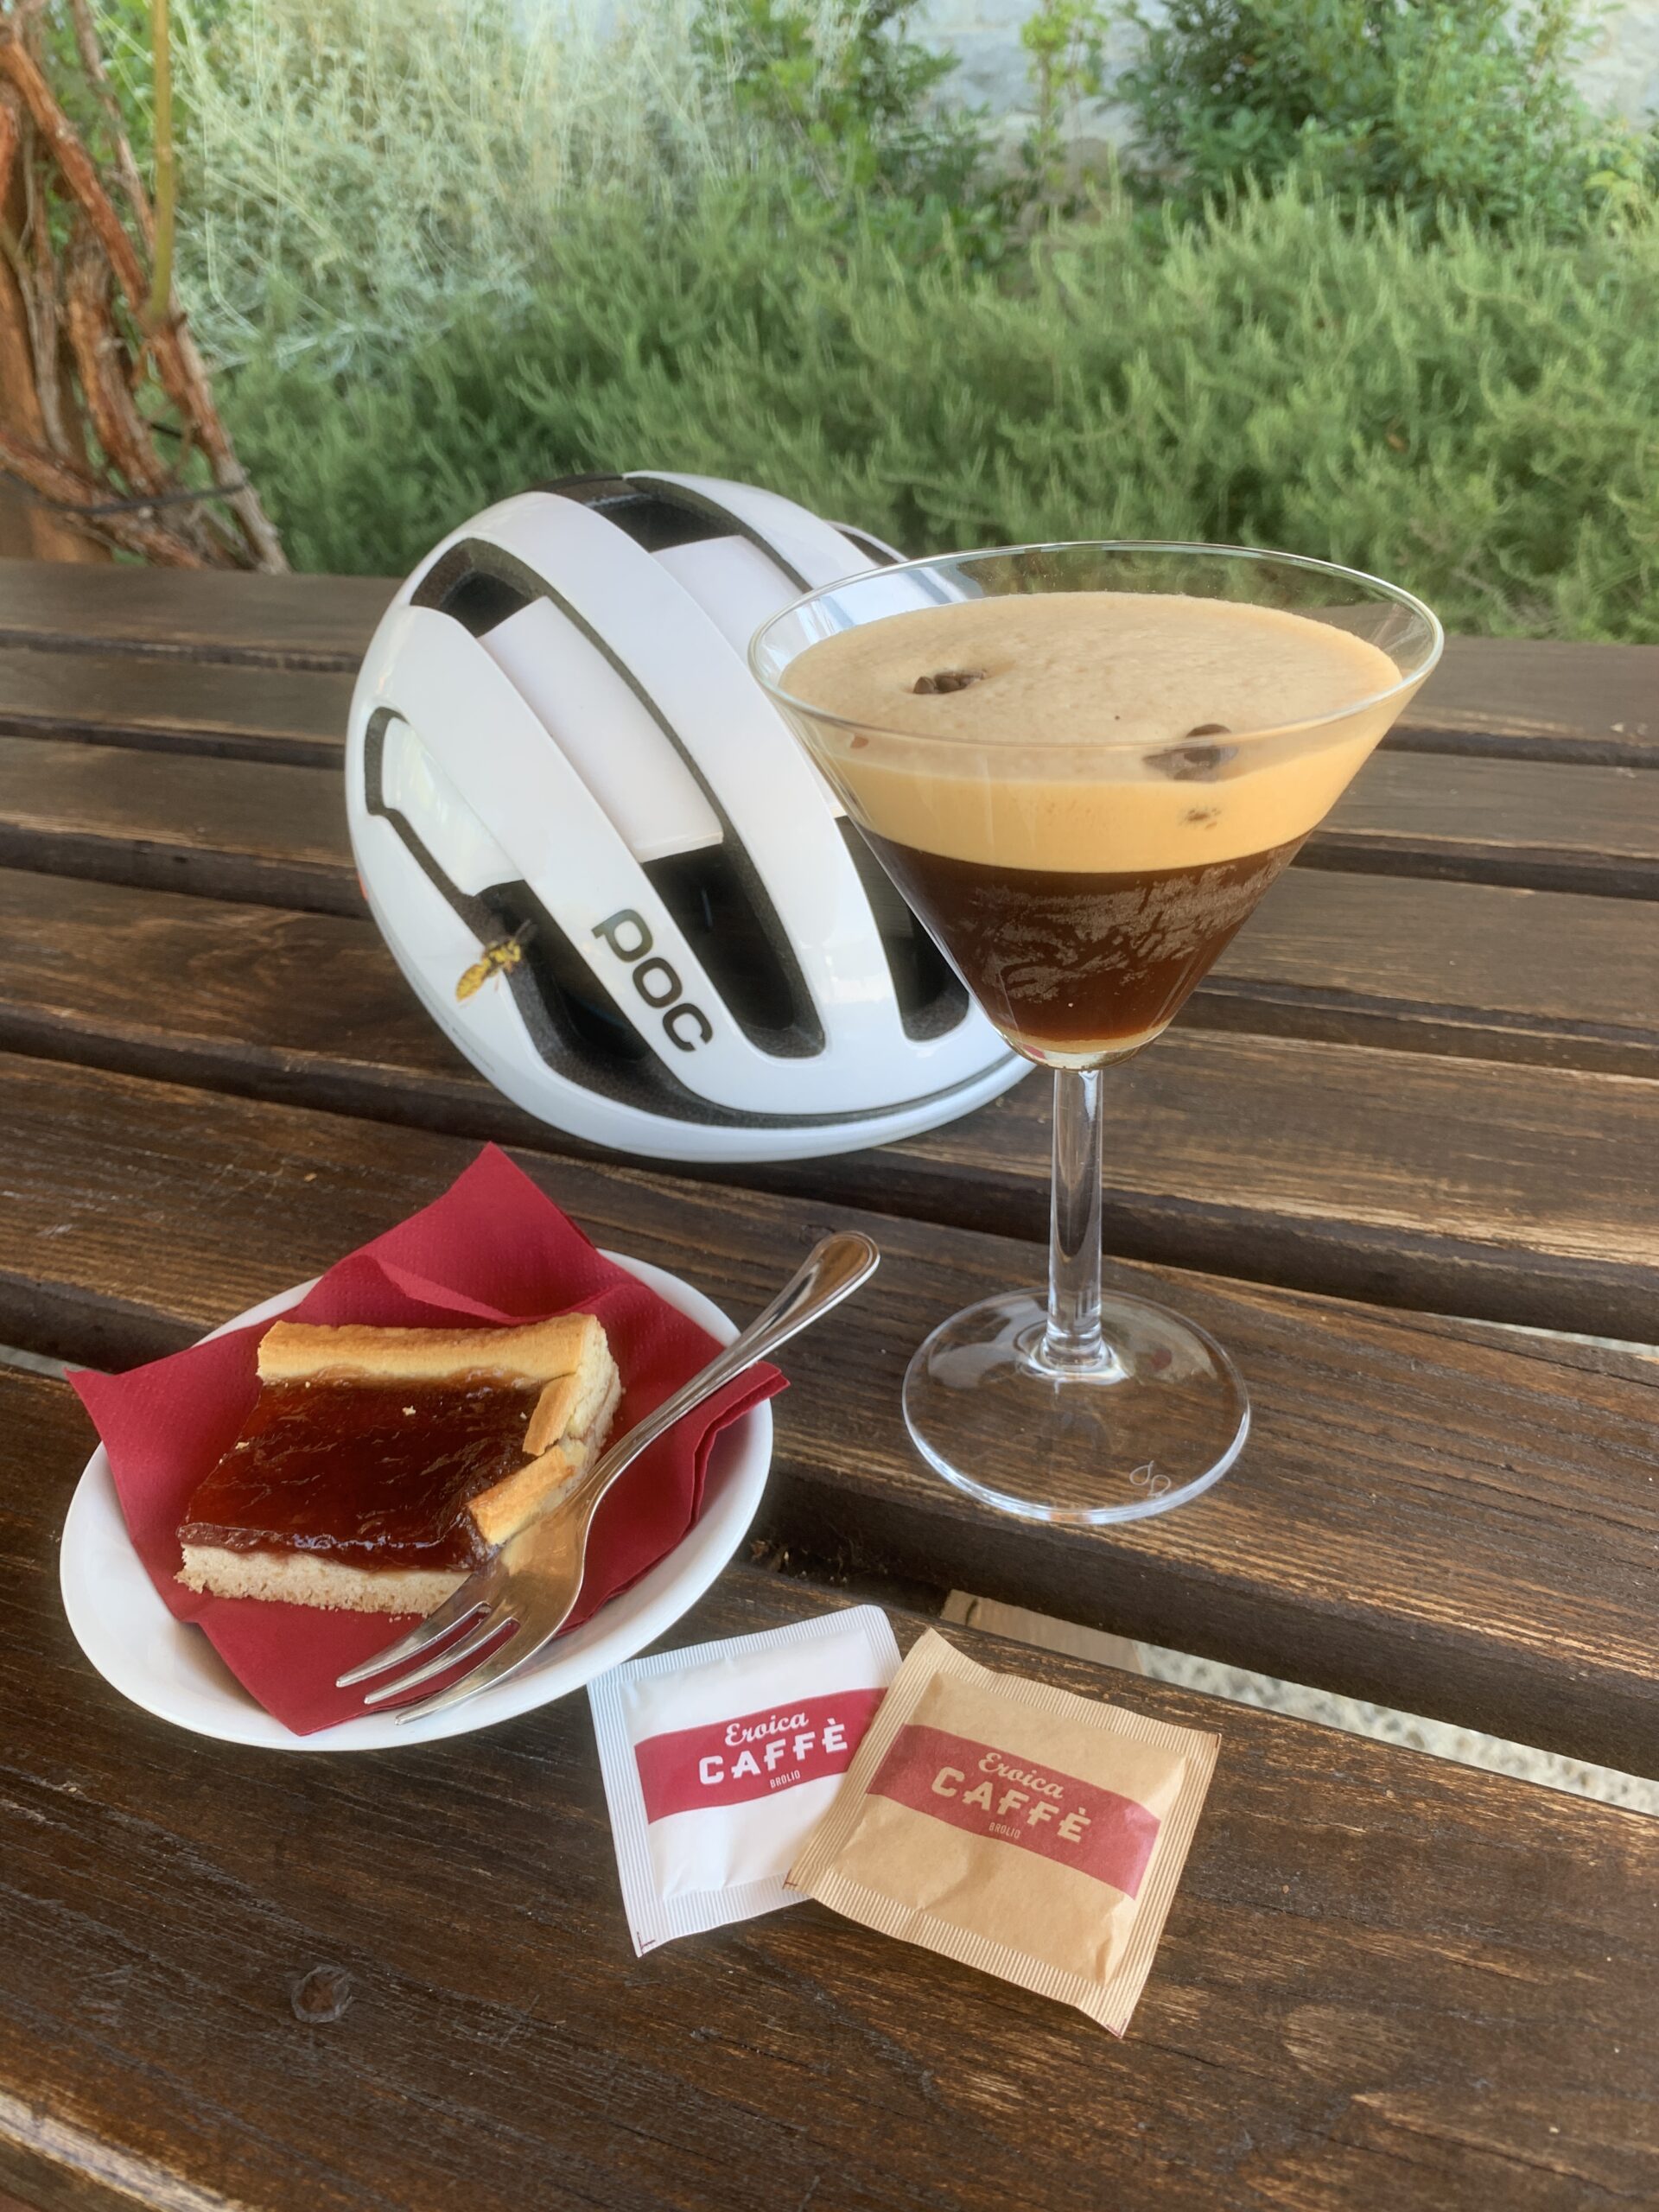 Eroica cafè and a wasp